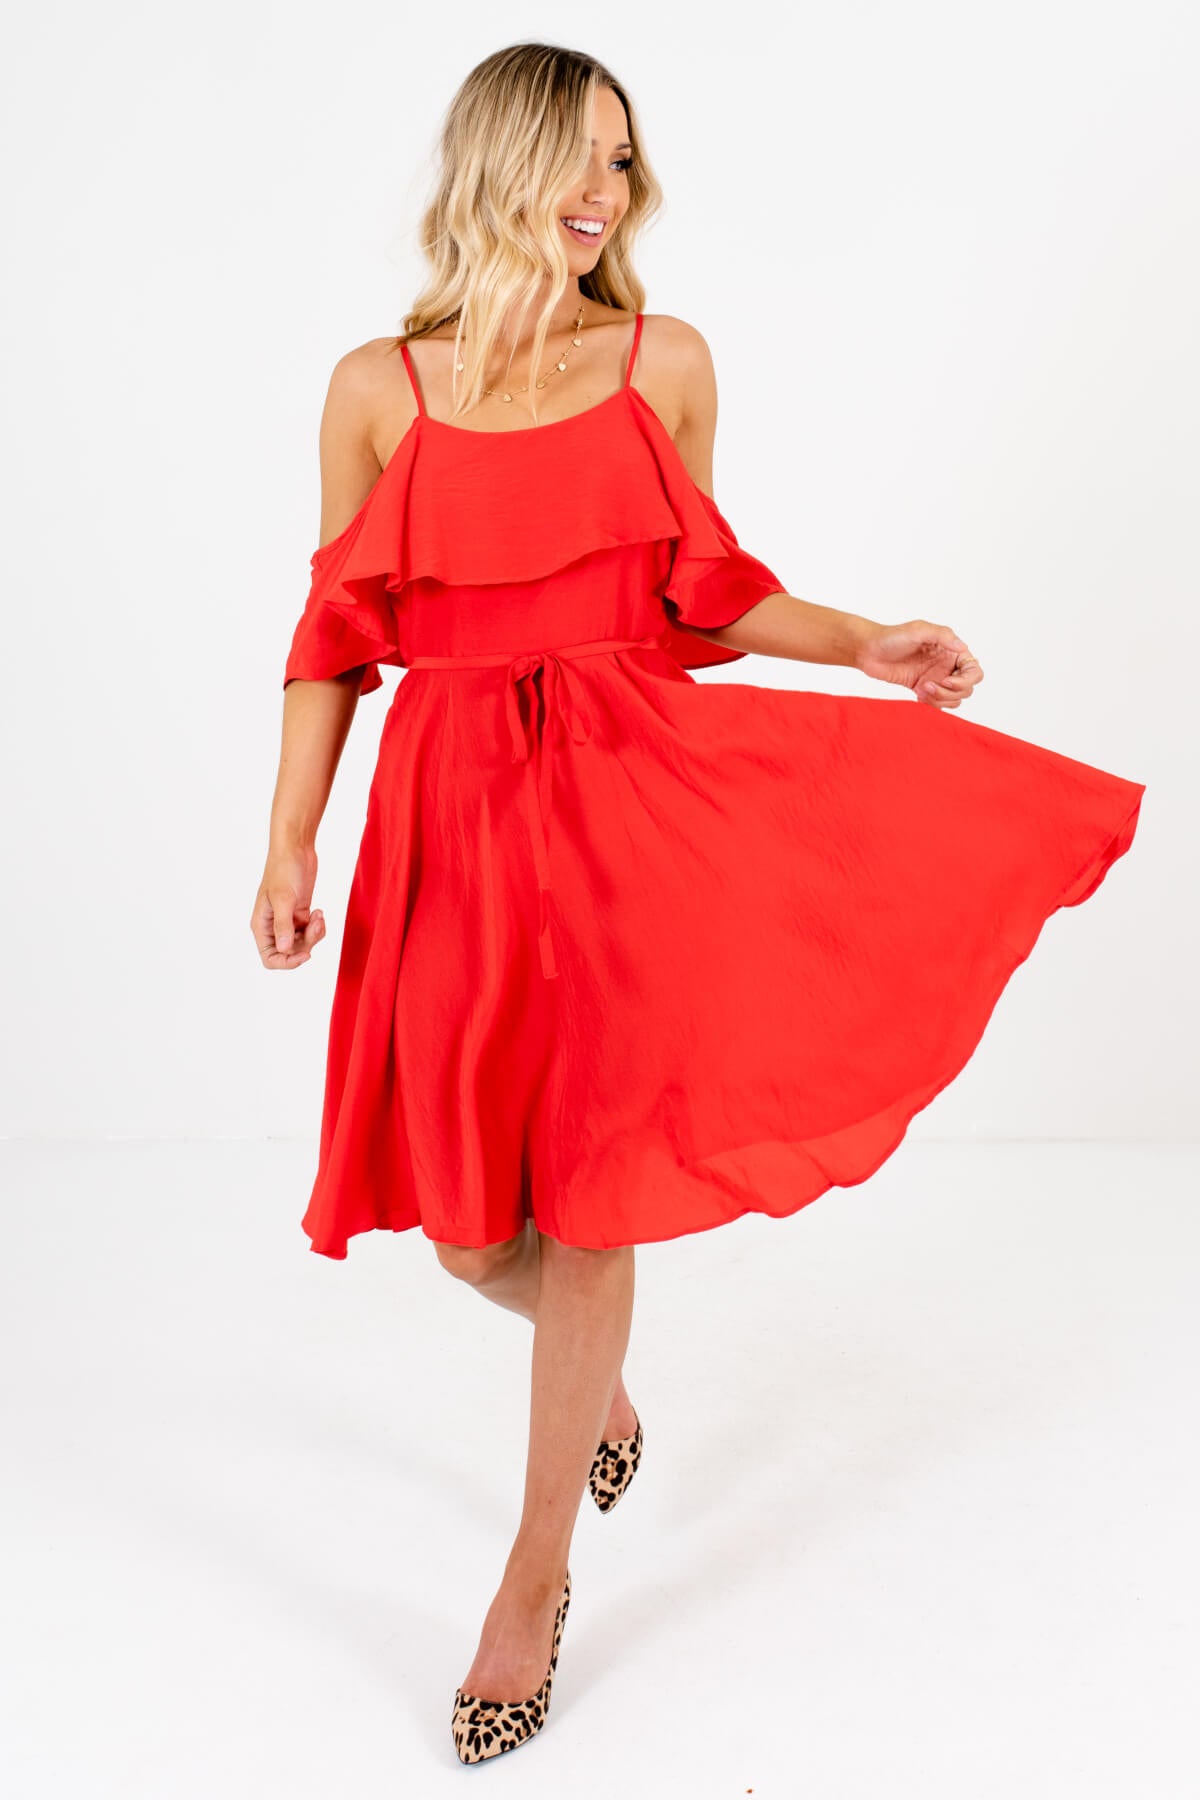 Women's Red Spring and Summertime Boutique Clothing